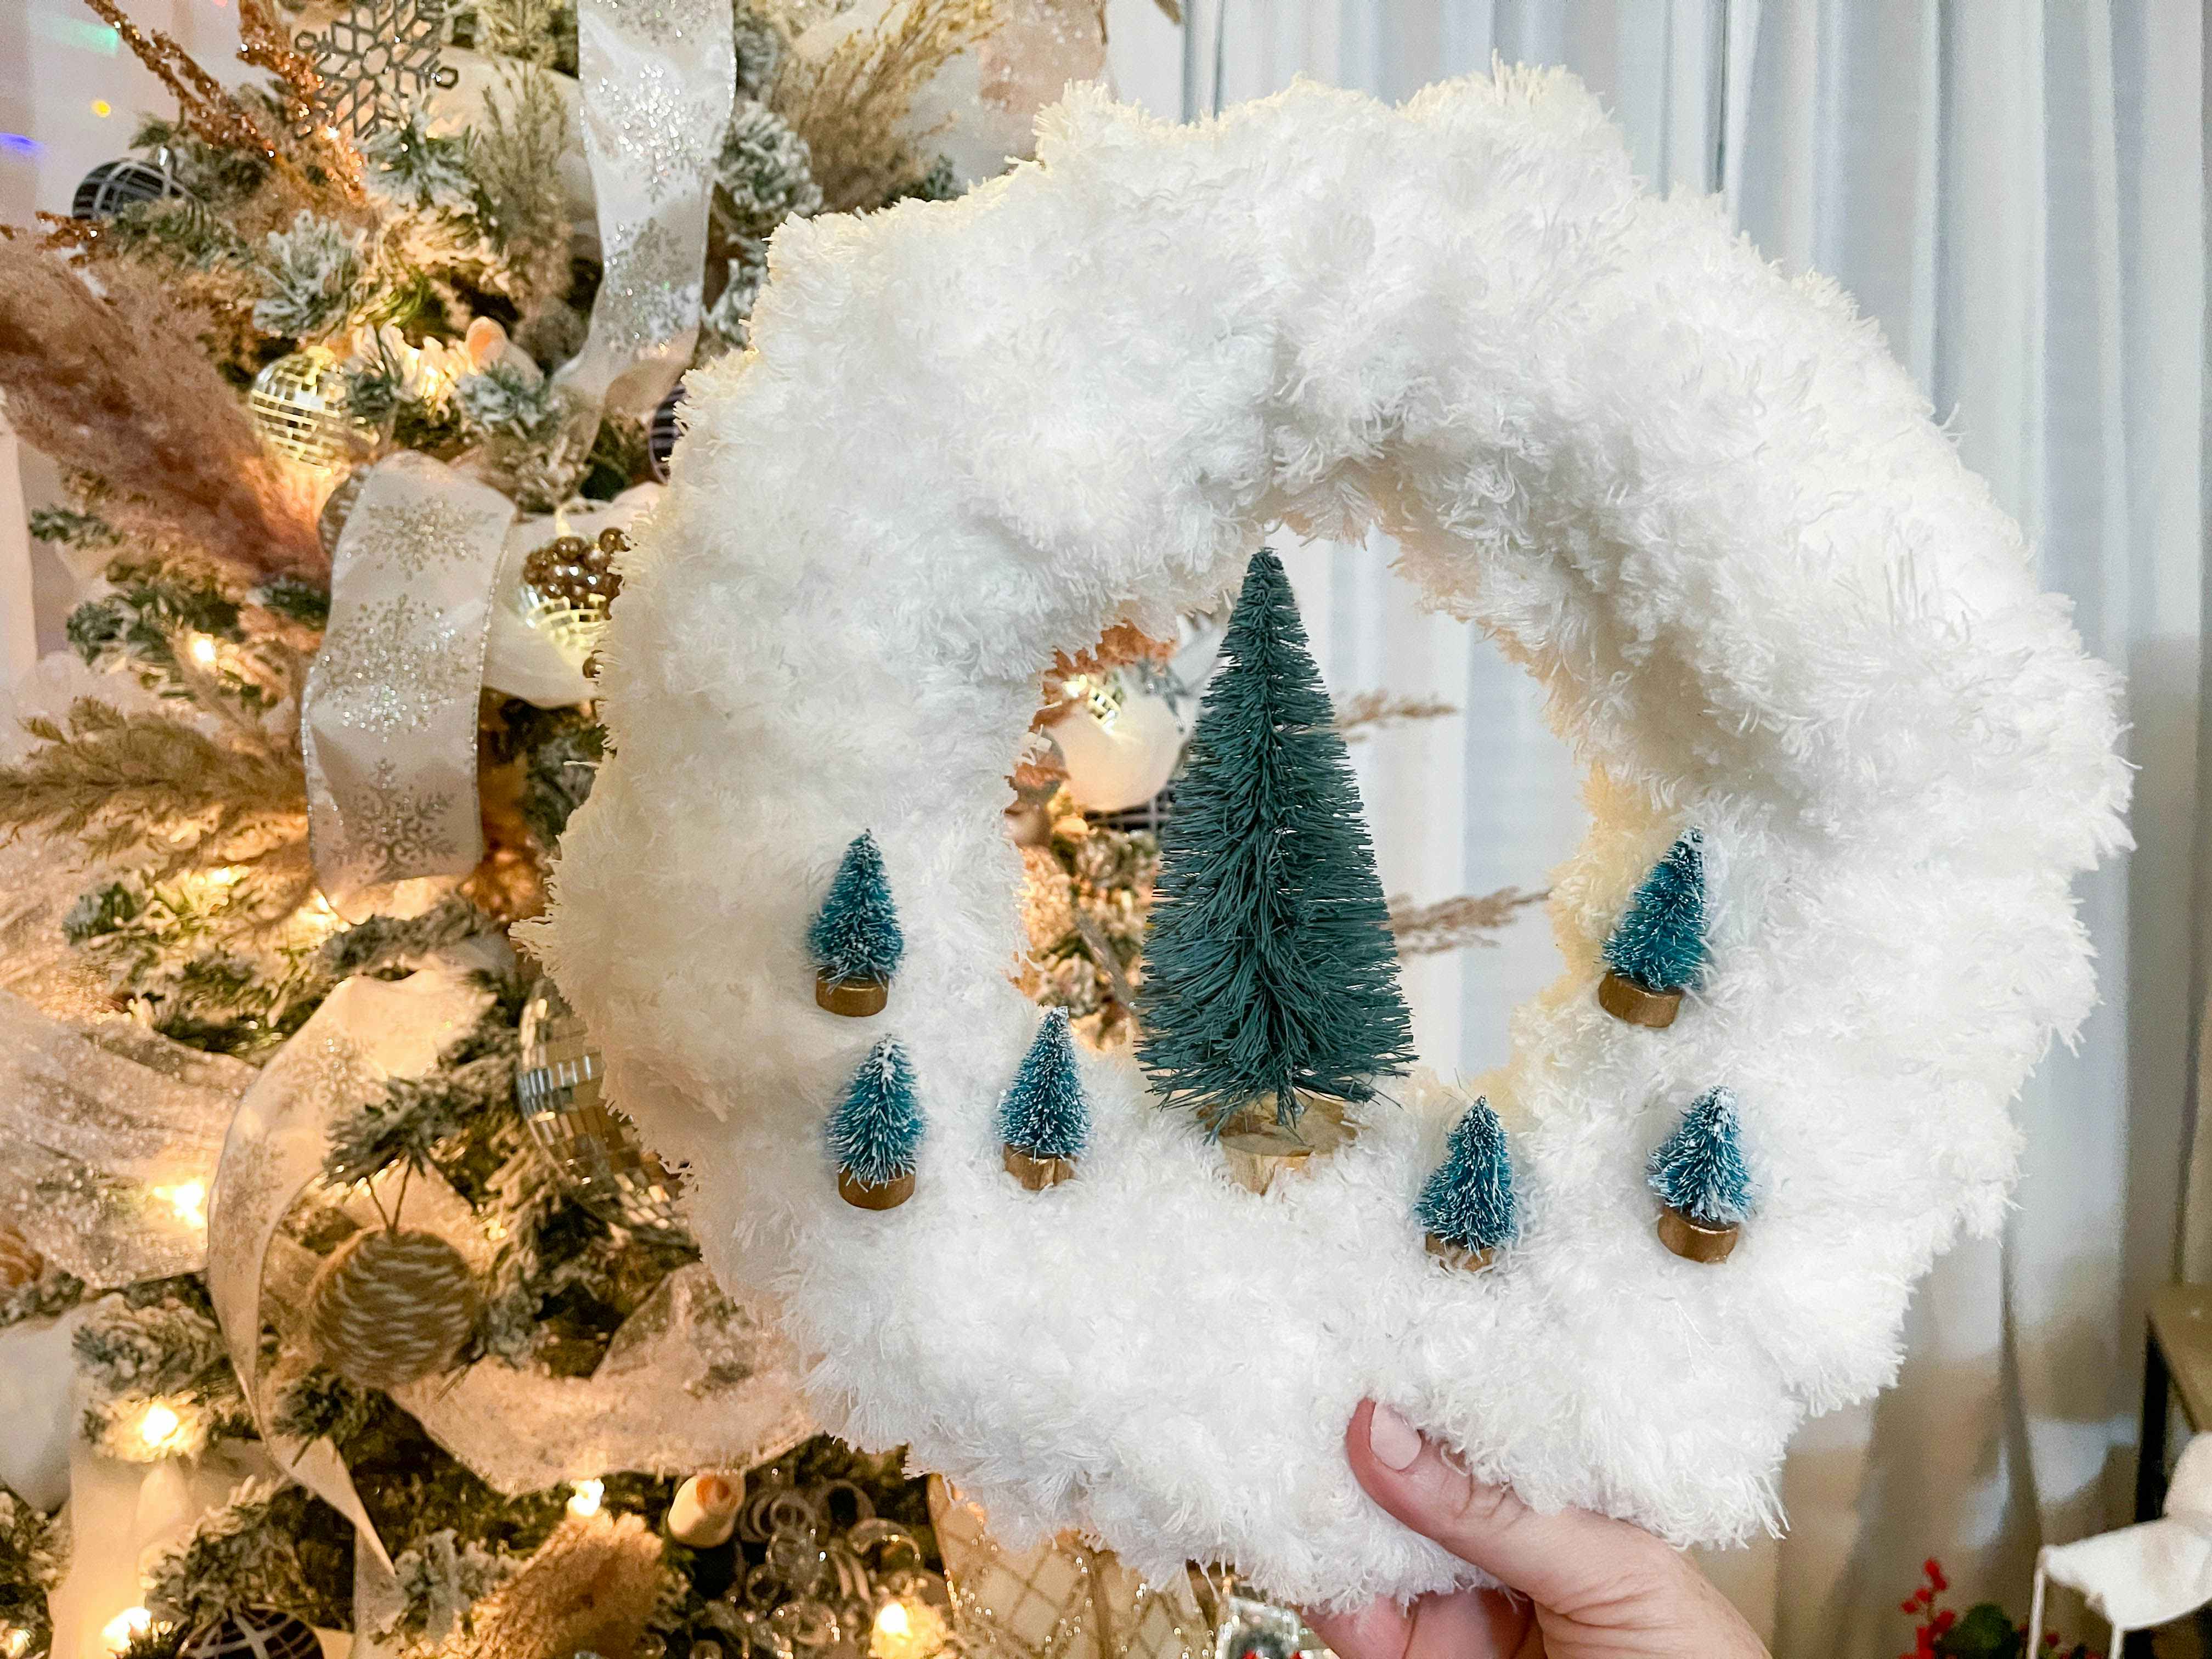 a white fluffy wreath made from mops and bottle brush trees being held in front of a christmas tree 